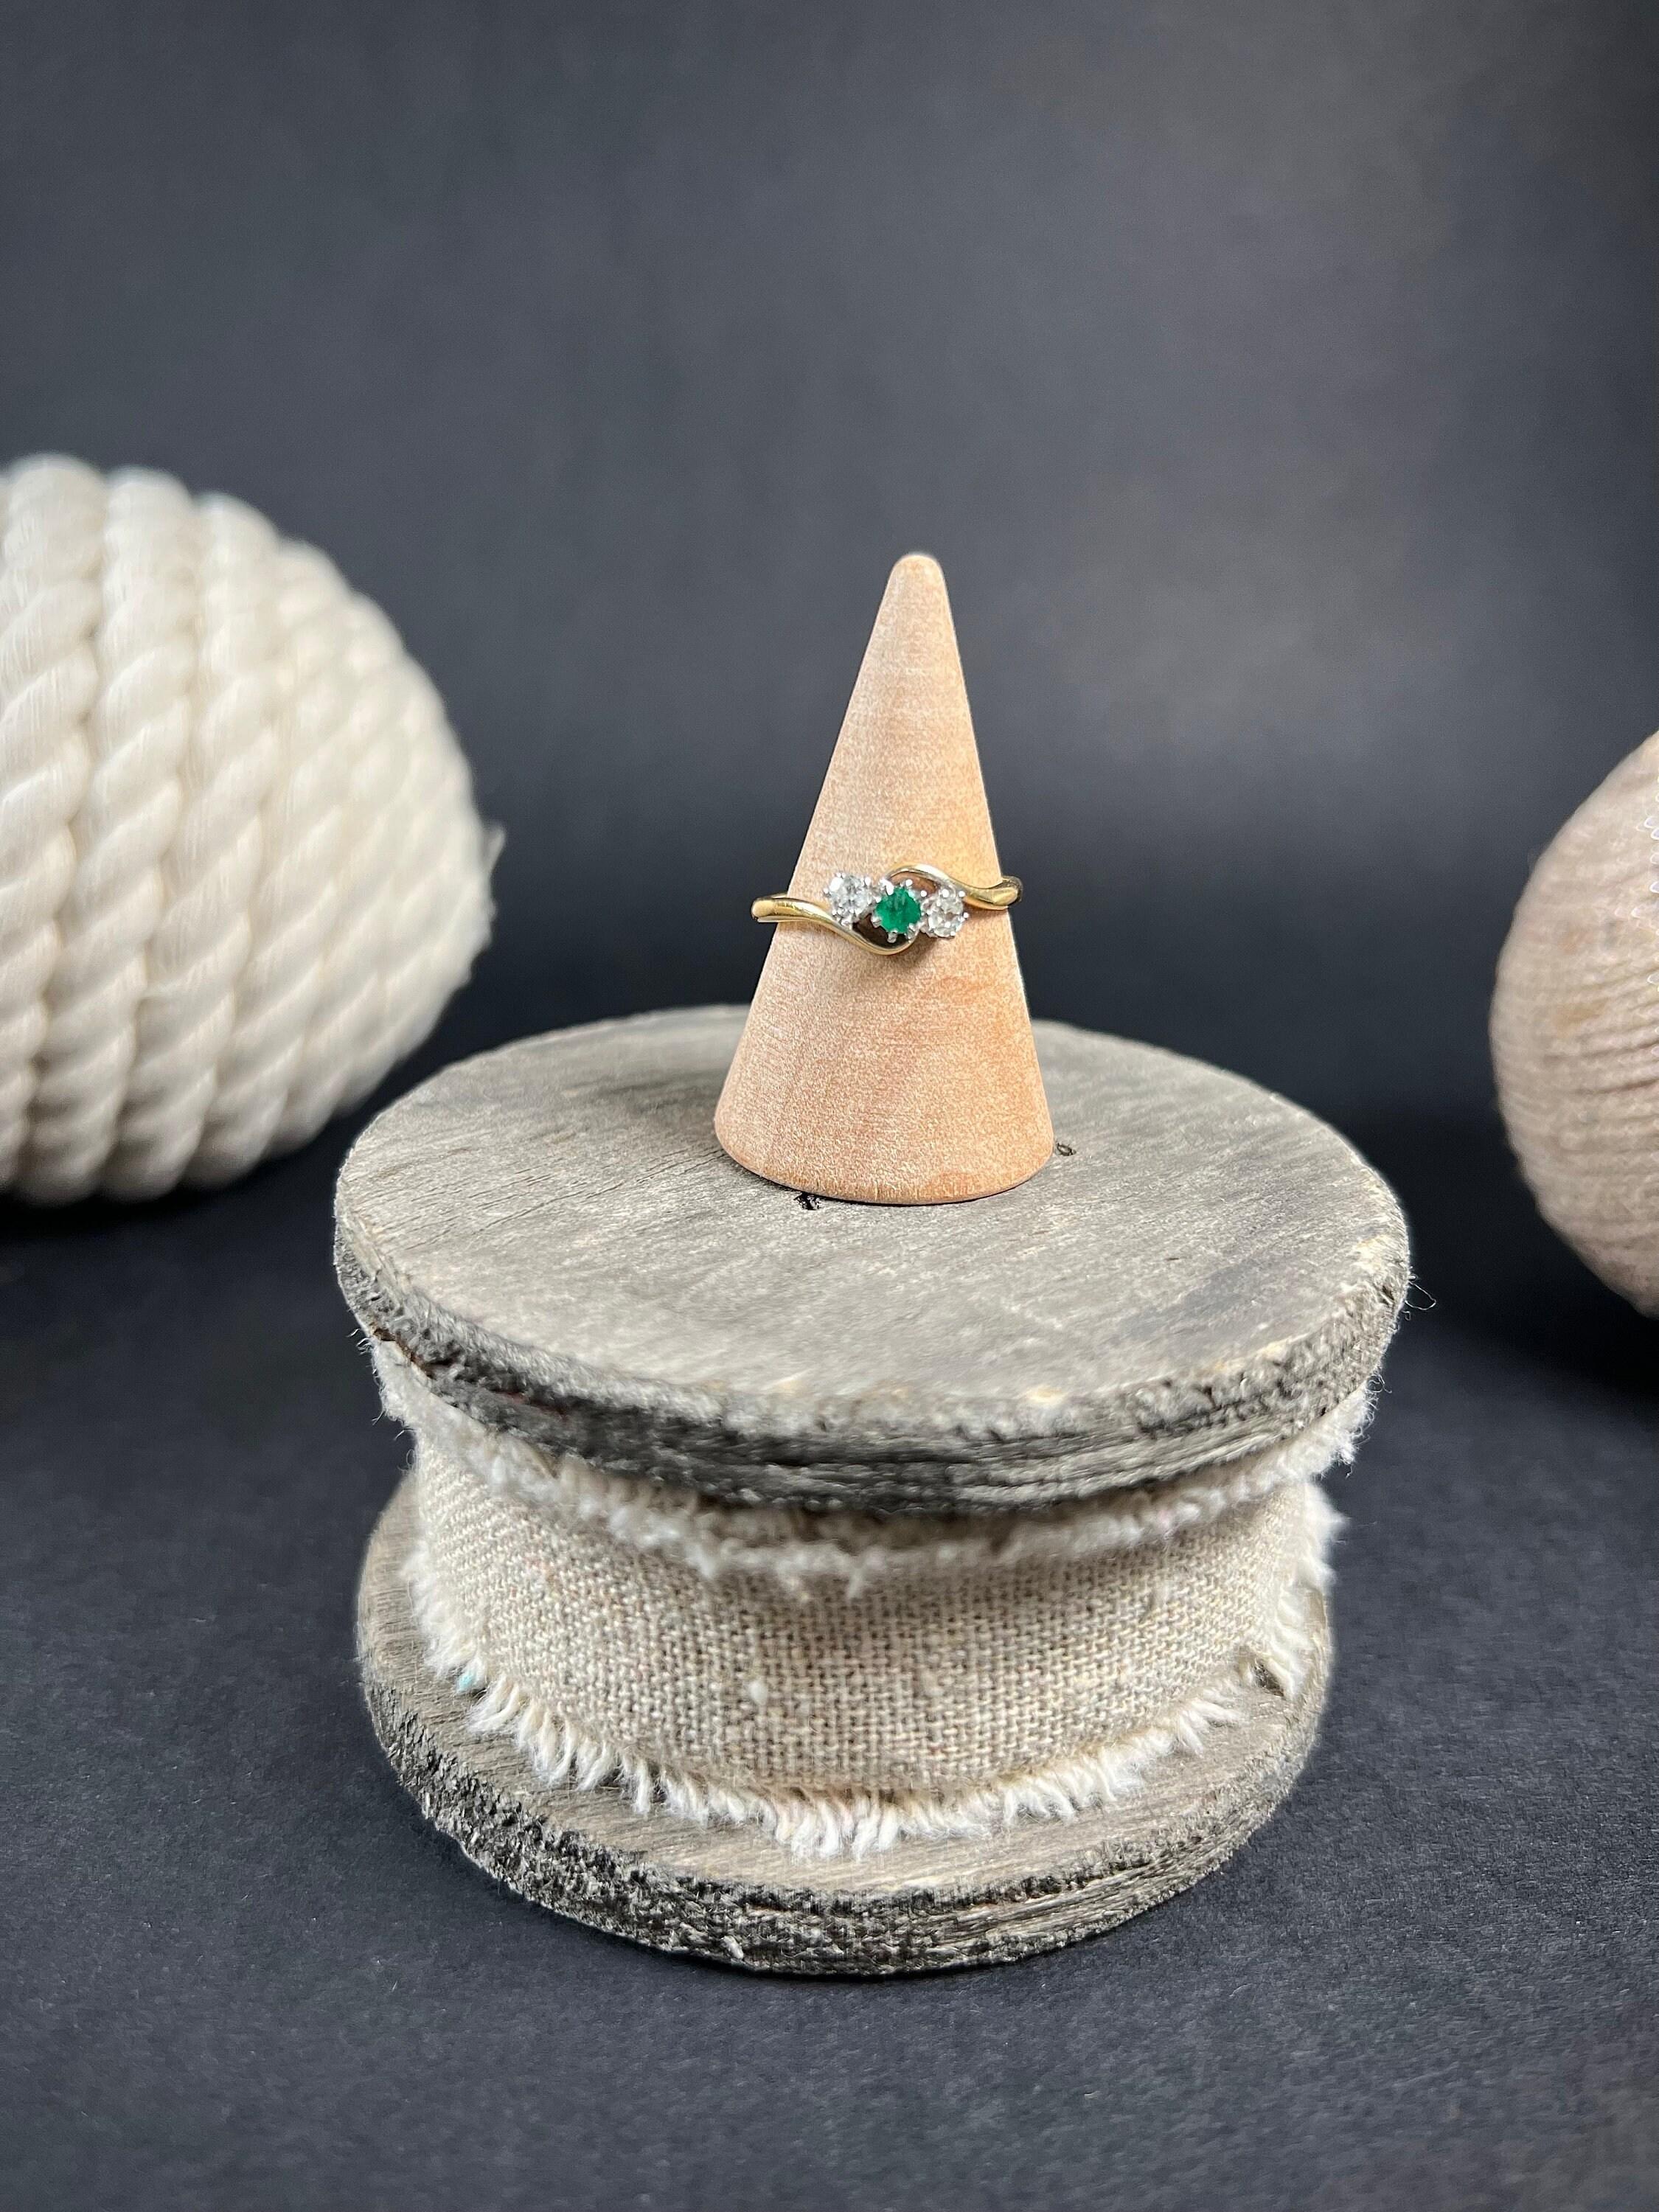 Vintage Emerald & Diamond Crossover Ring

18ct Gold & Platinum Stamped 

Circa 1940s

Makers Mark F H L 

This stunning trilogy crossover ring is a beautiful representation of vintage jewellery from the 1940s. Crafted from 18ct yellow gold and